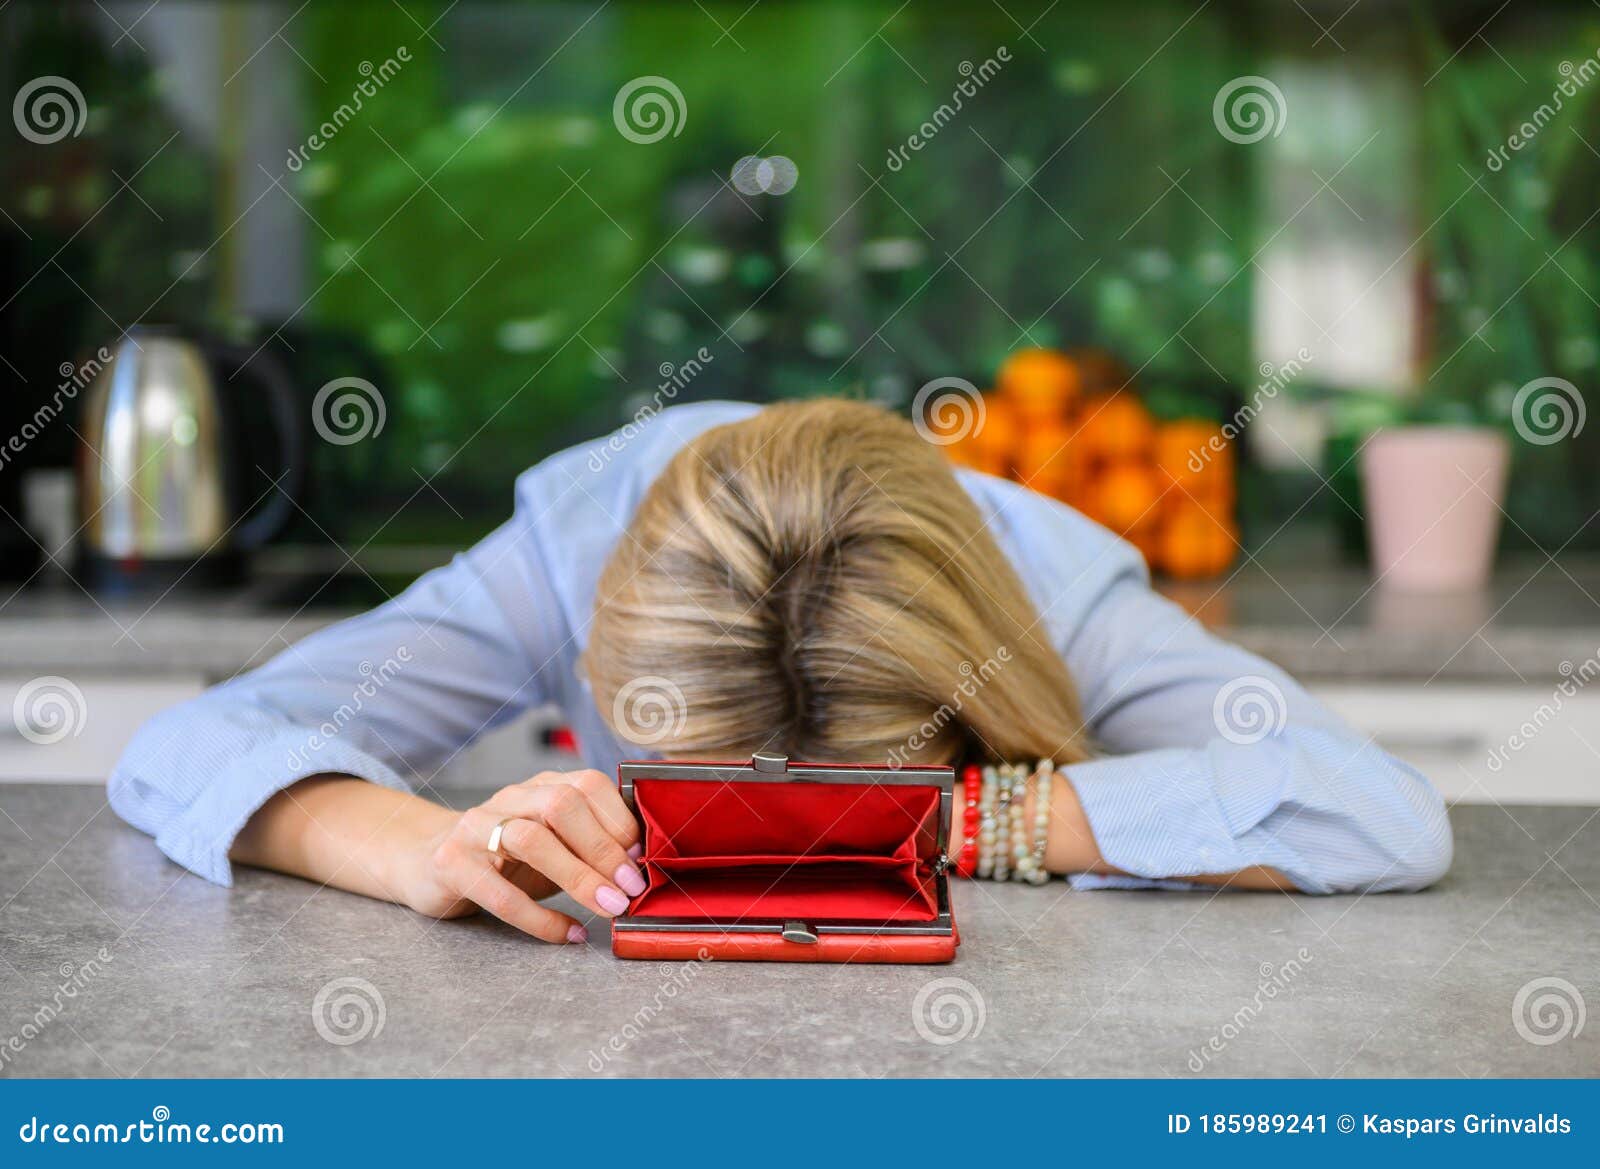 Desperate Woman Has No Money In Her Wallet Stock Image Image Of Girl